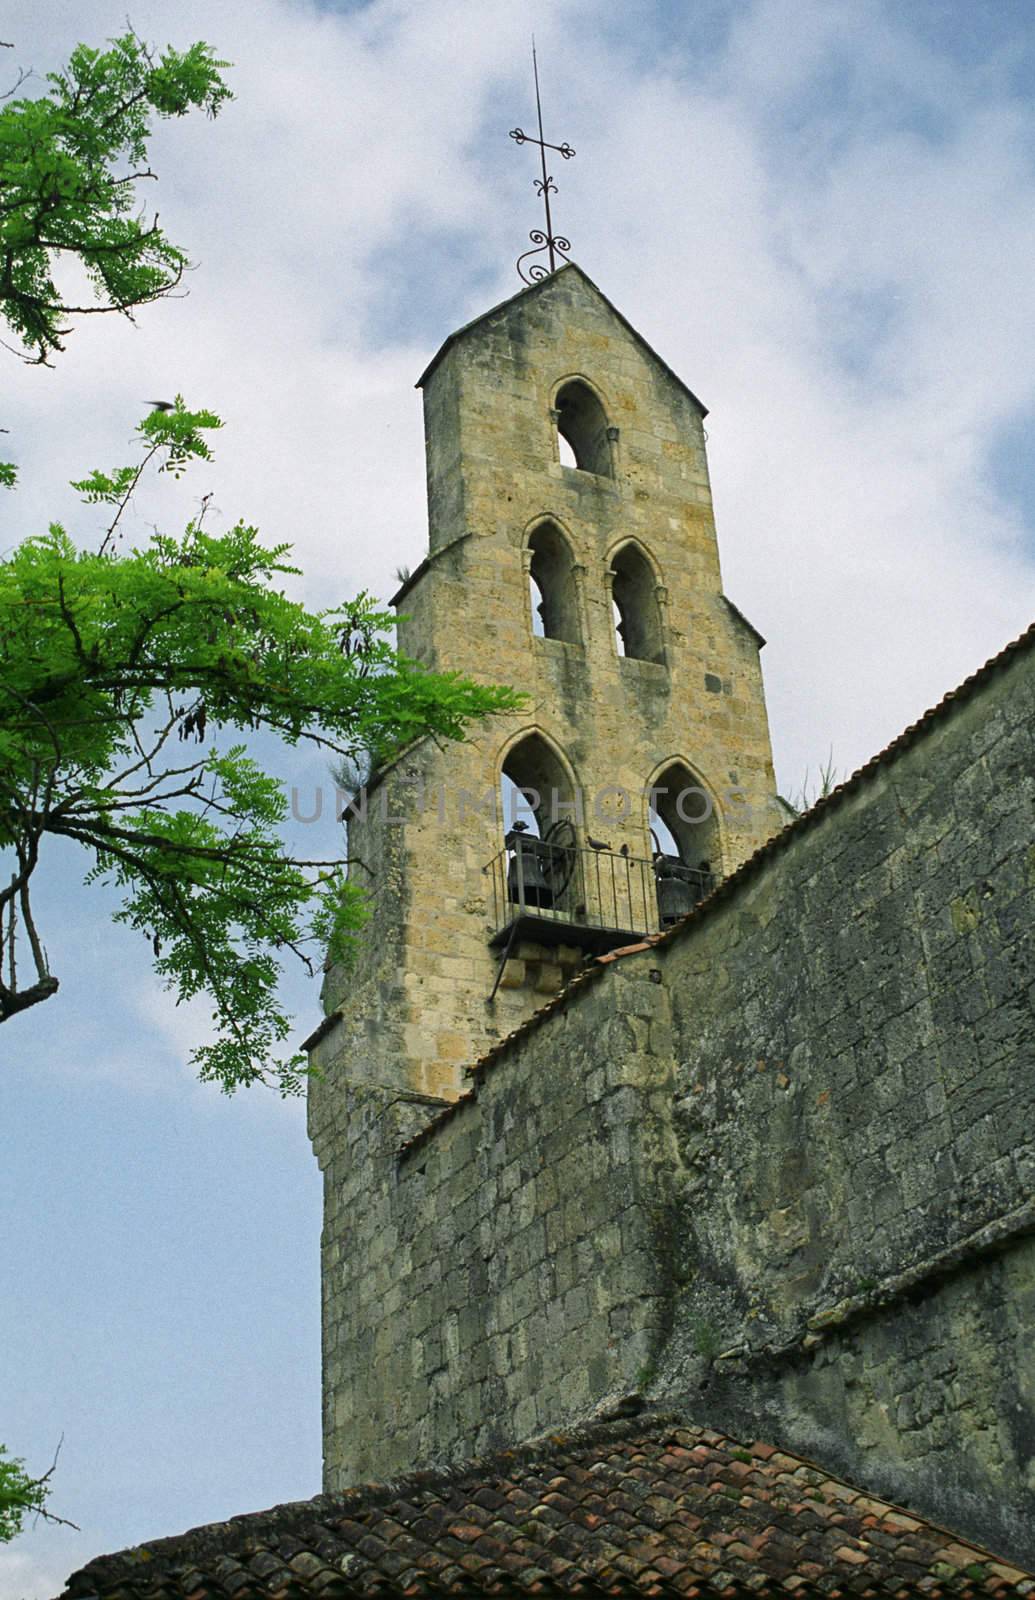 The bell tower of the parish church in Lannes SW France